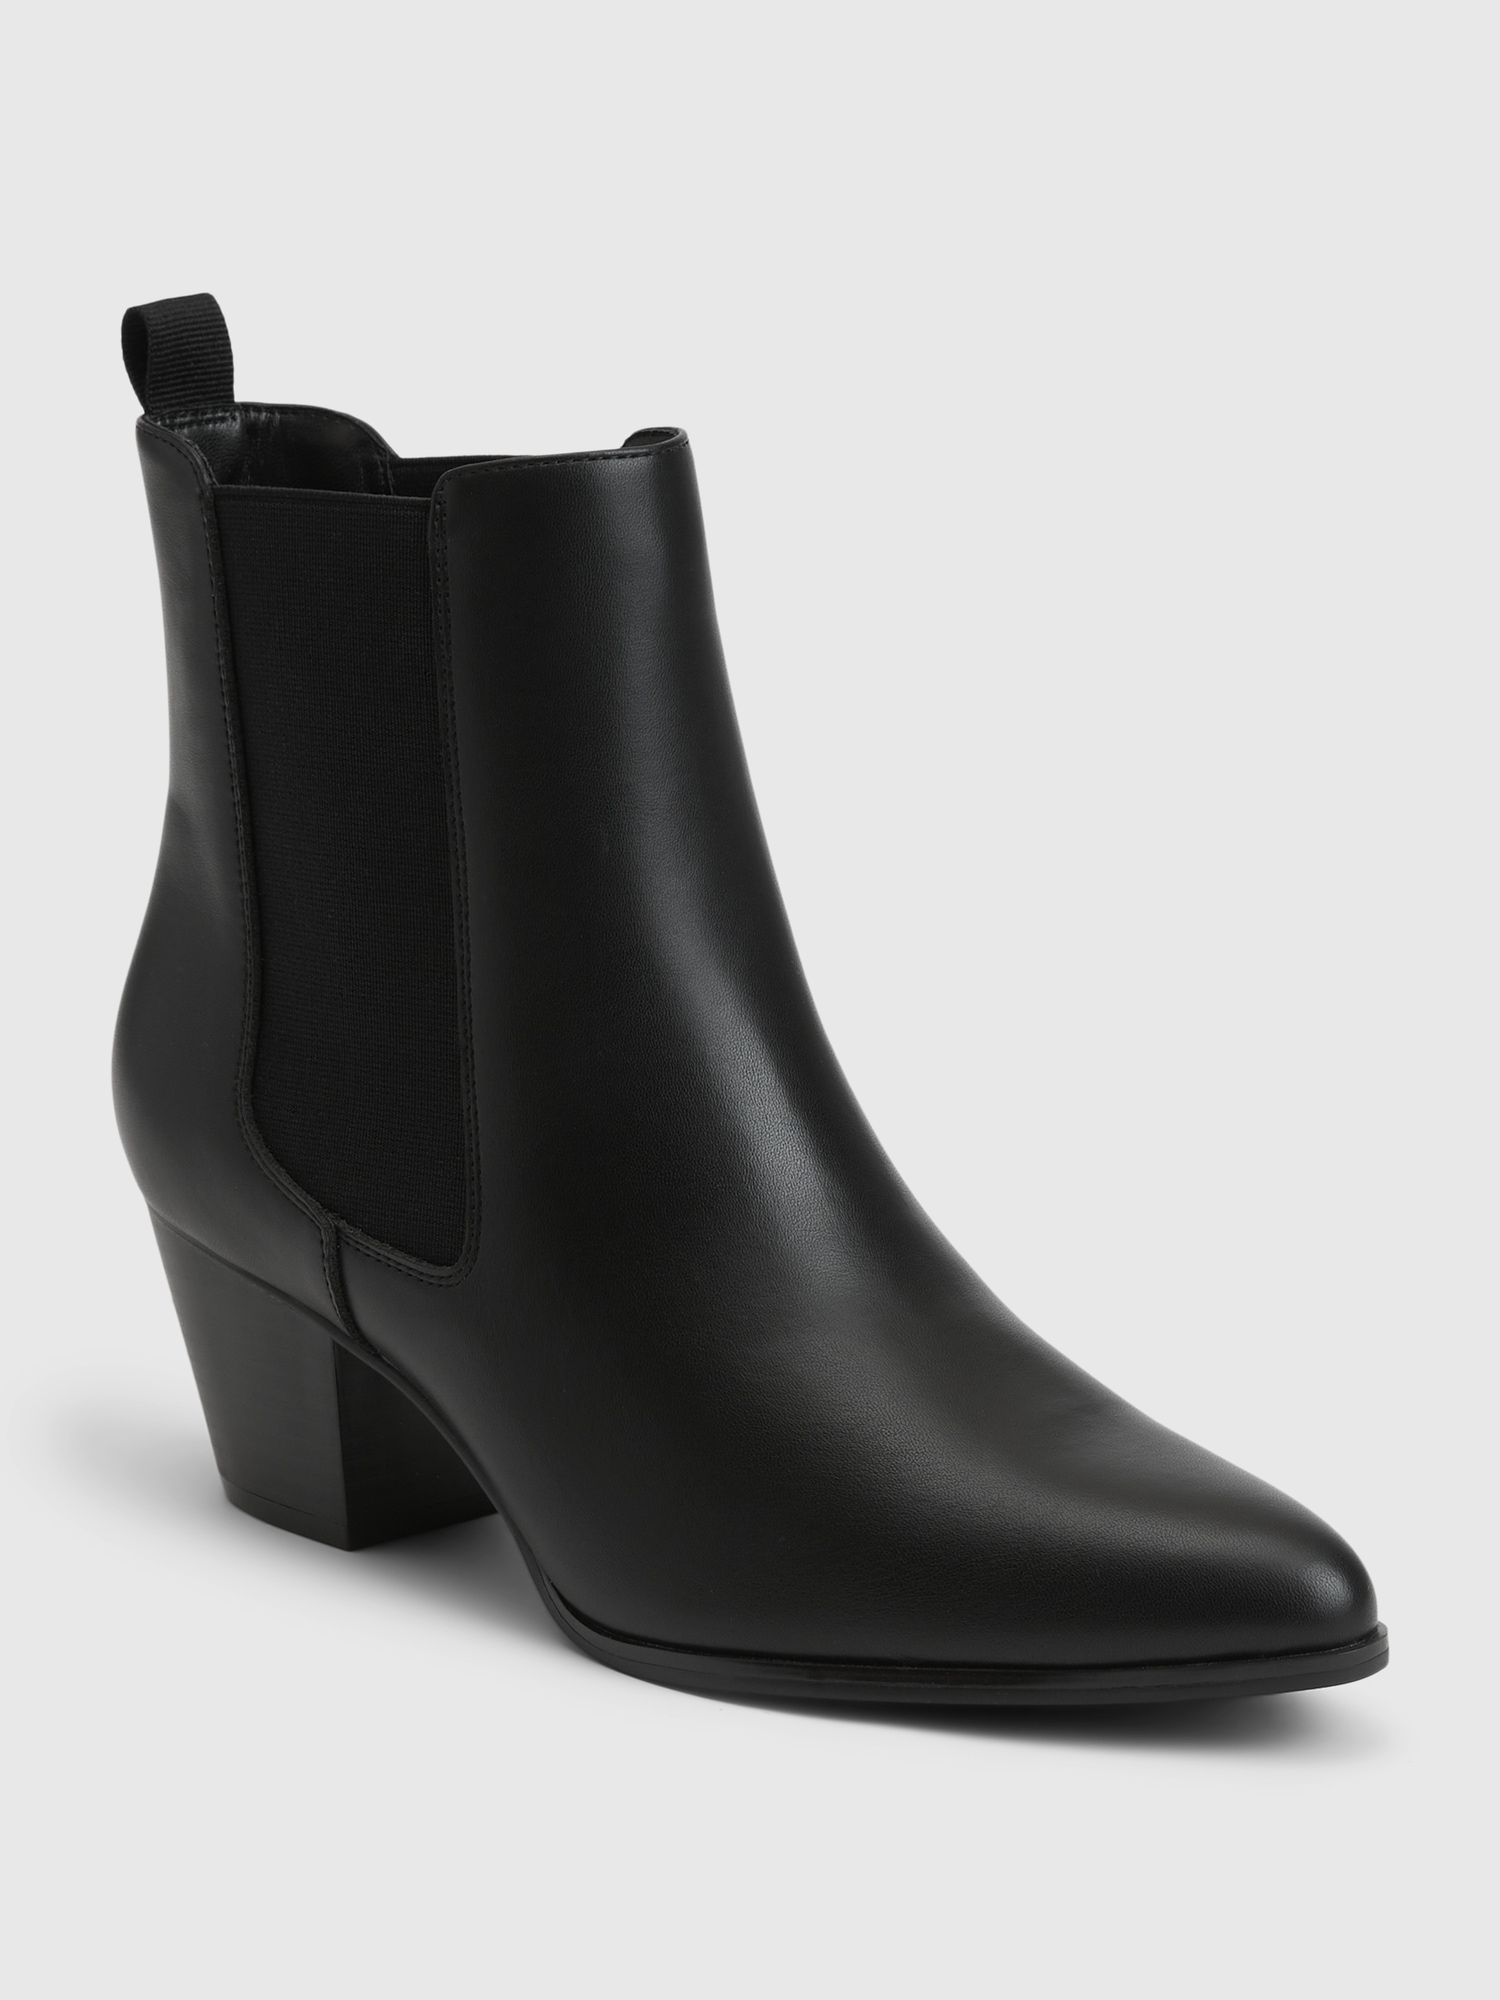 Chelsea Boots |